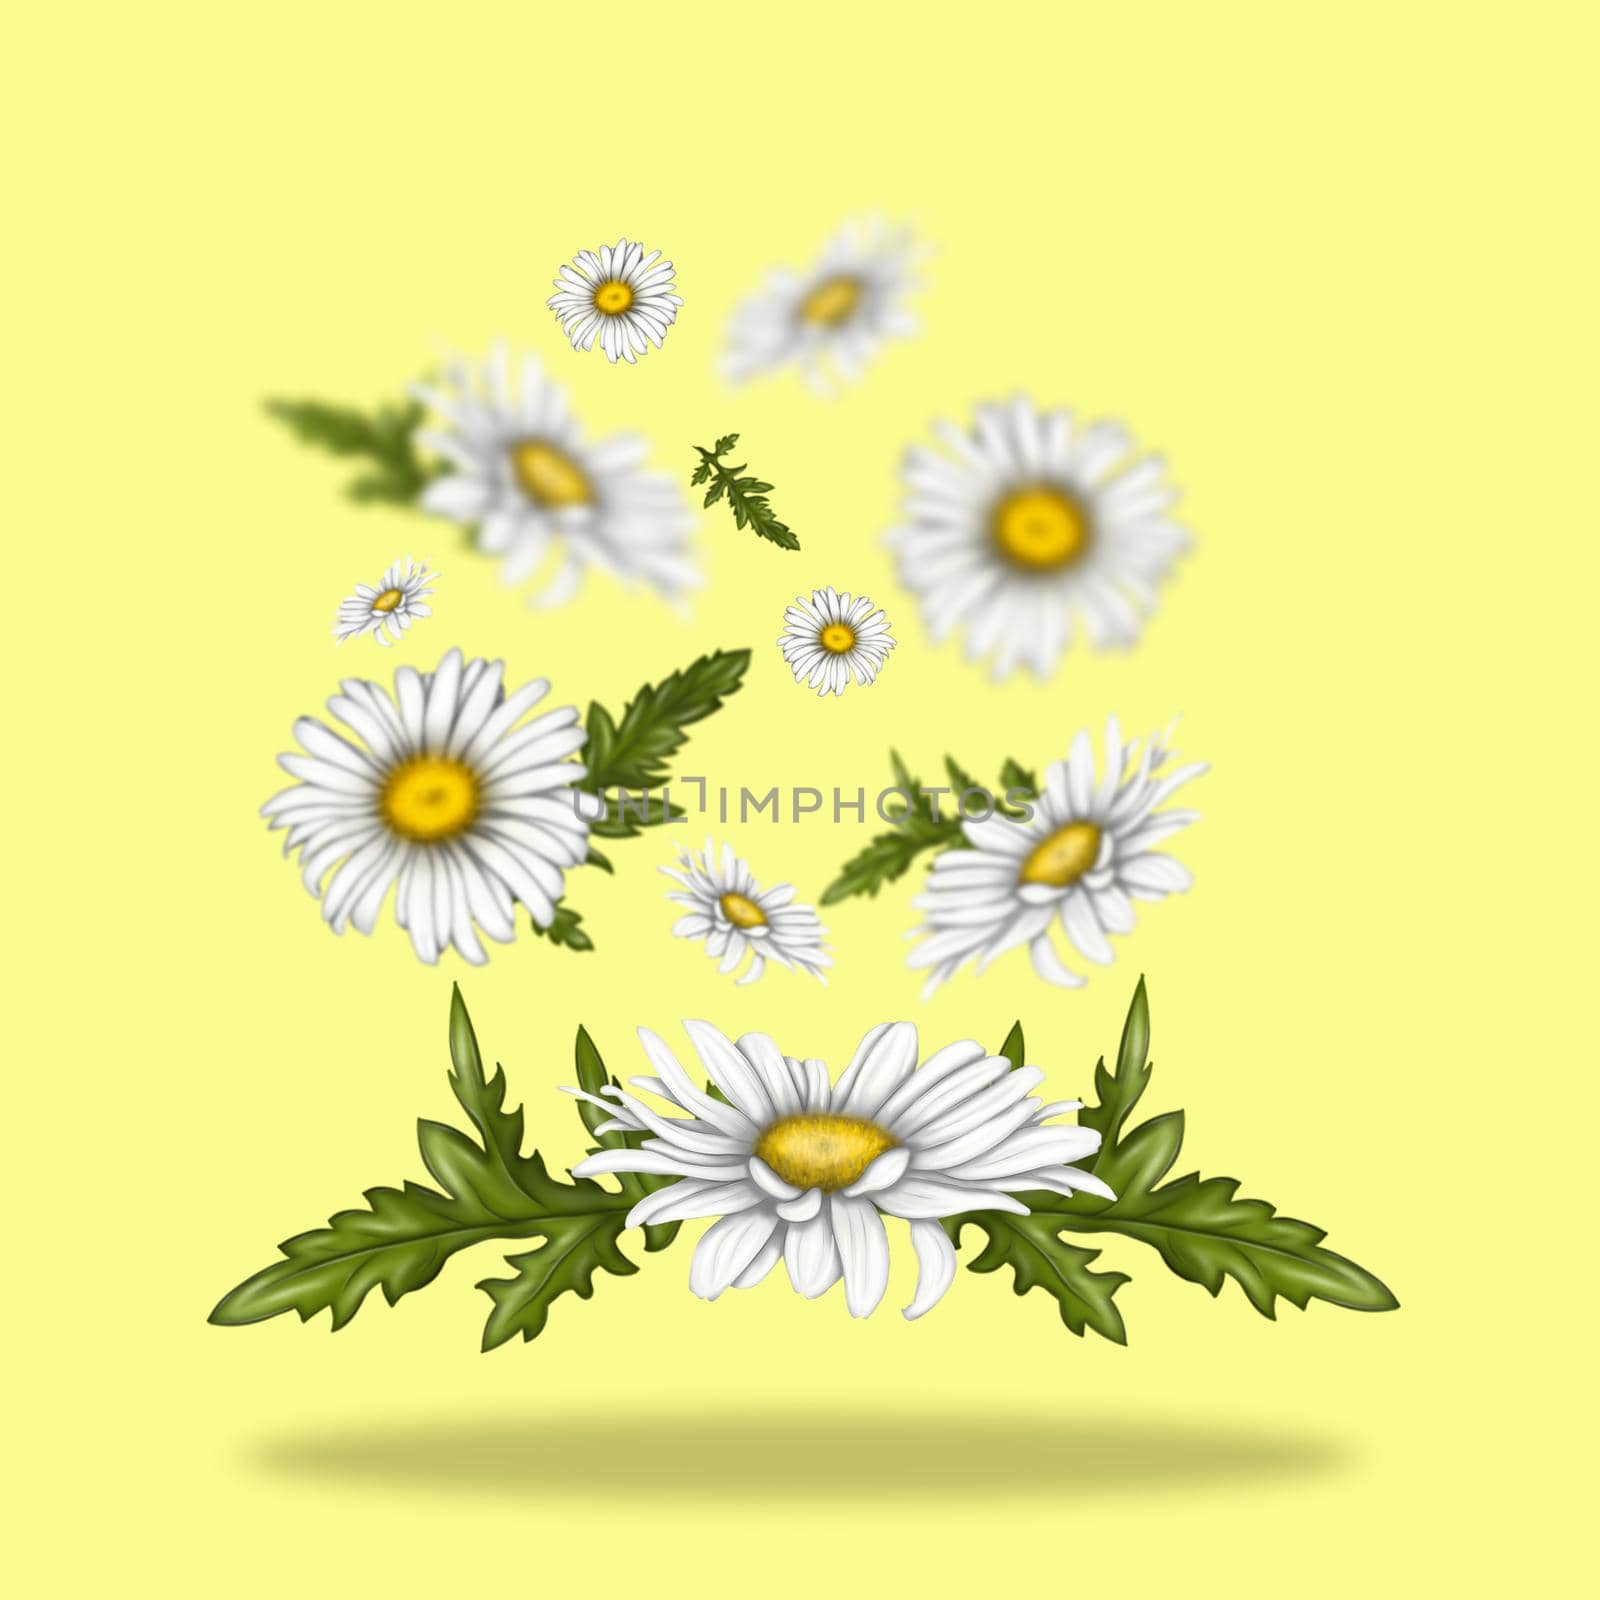 Illustration of chamomile flowers. Flowers float freely in space. White flowers on a light background.  by Alina_Lebed